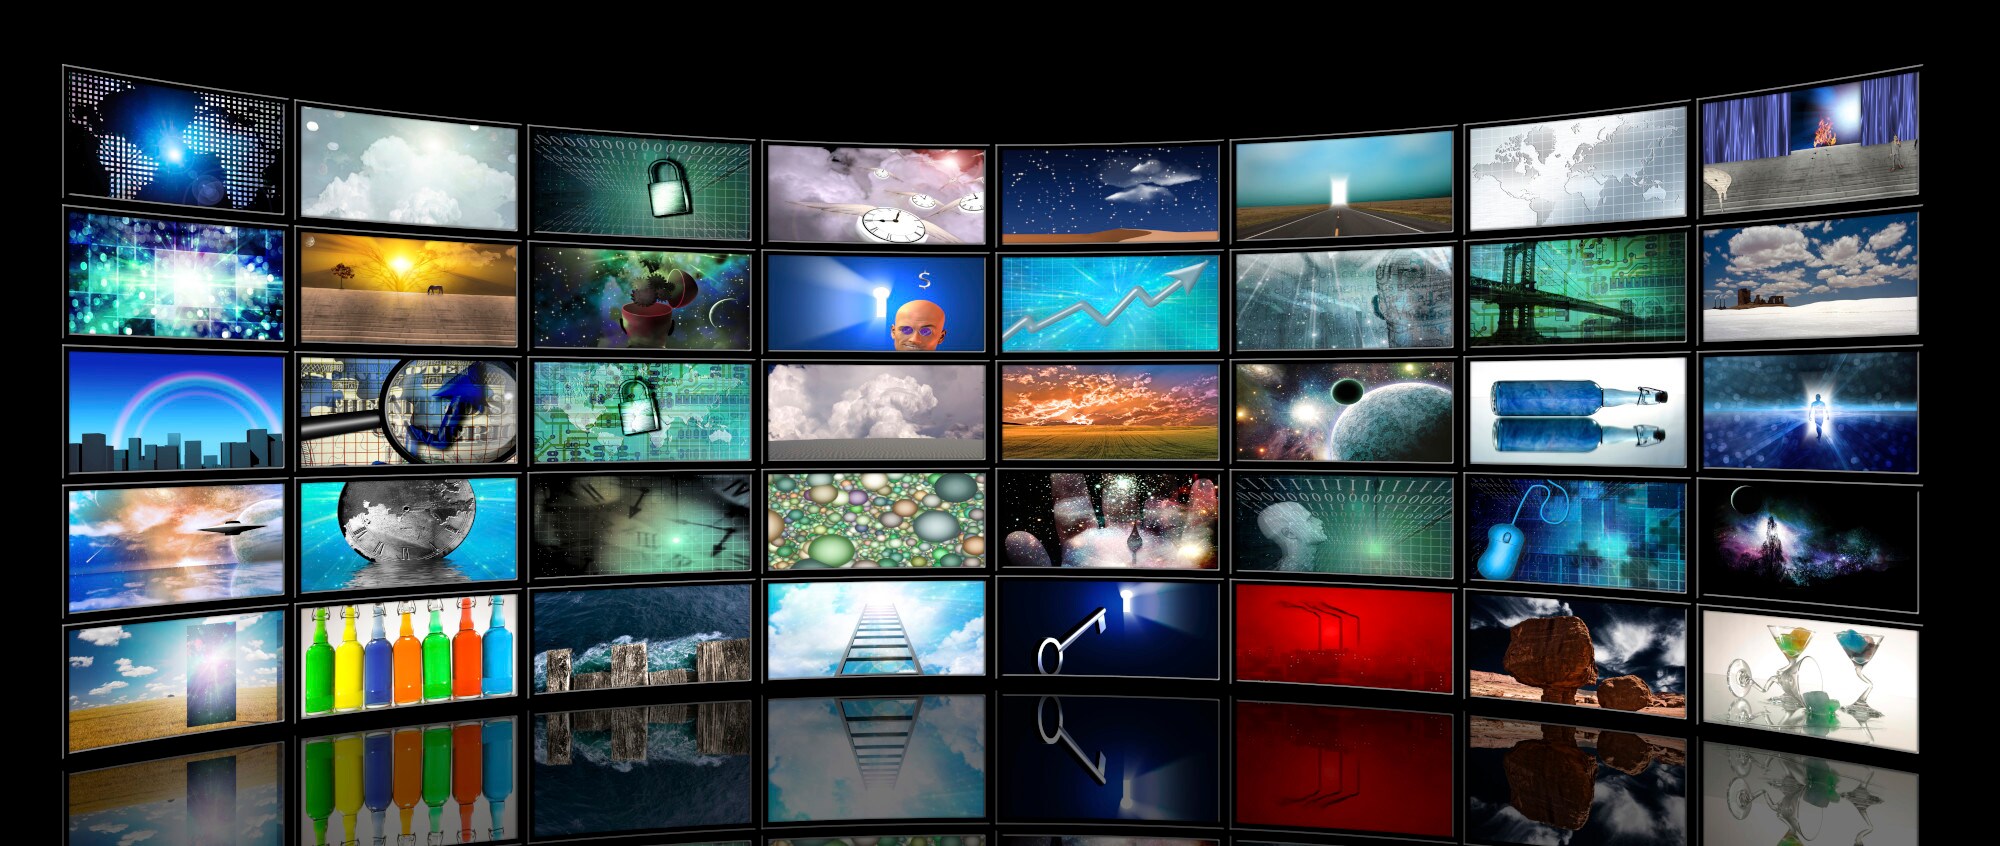 Wall of media screens displaying different content.